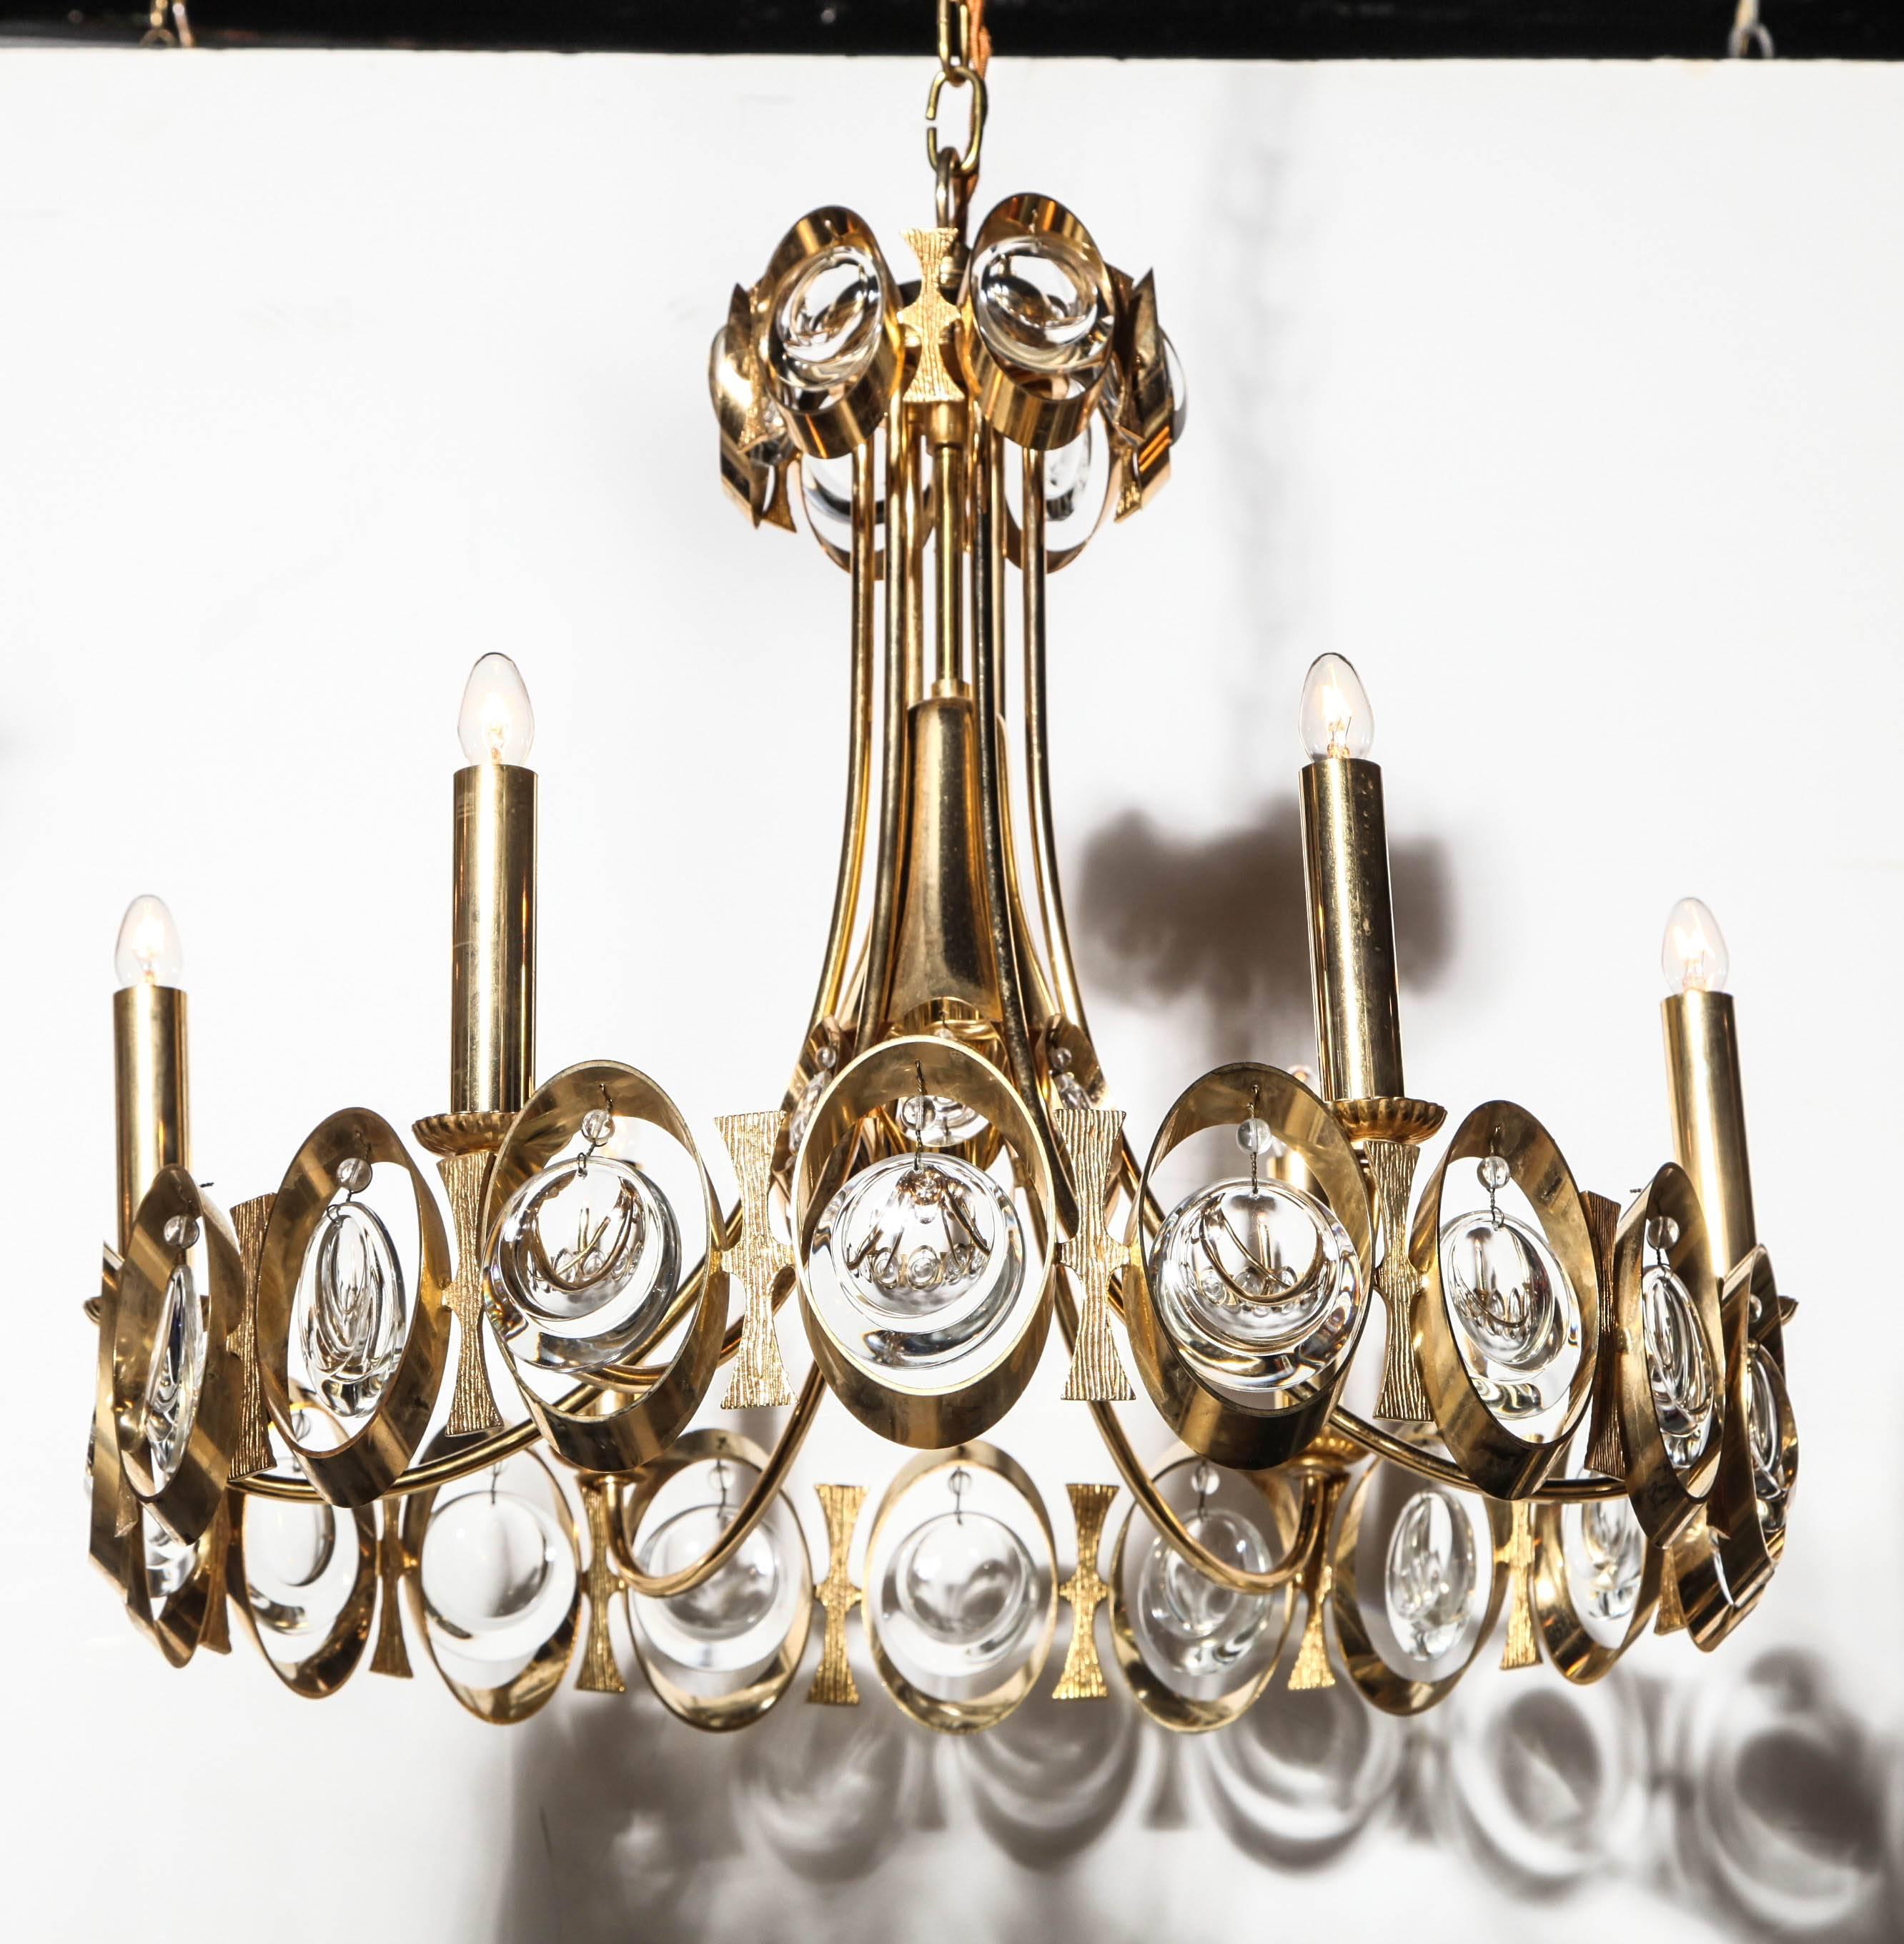 Palwa Germany Gilt Brass and Austrian Clear Crystal Hanging Pendant, 1960s. Featuring a round gilt Brass ring with six candlesticks and three levels of hanging shimmering transparent Austrian crystals. Adjustable height. Brilliant. Reflective.